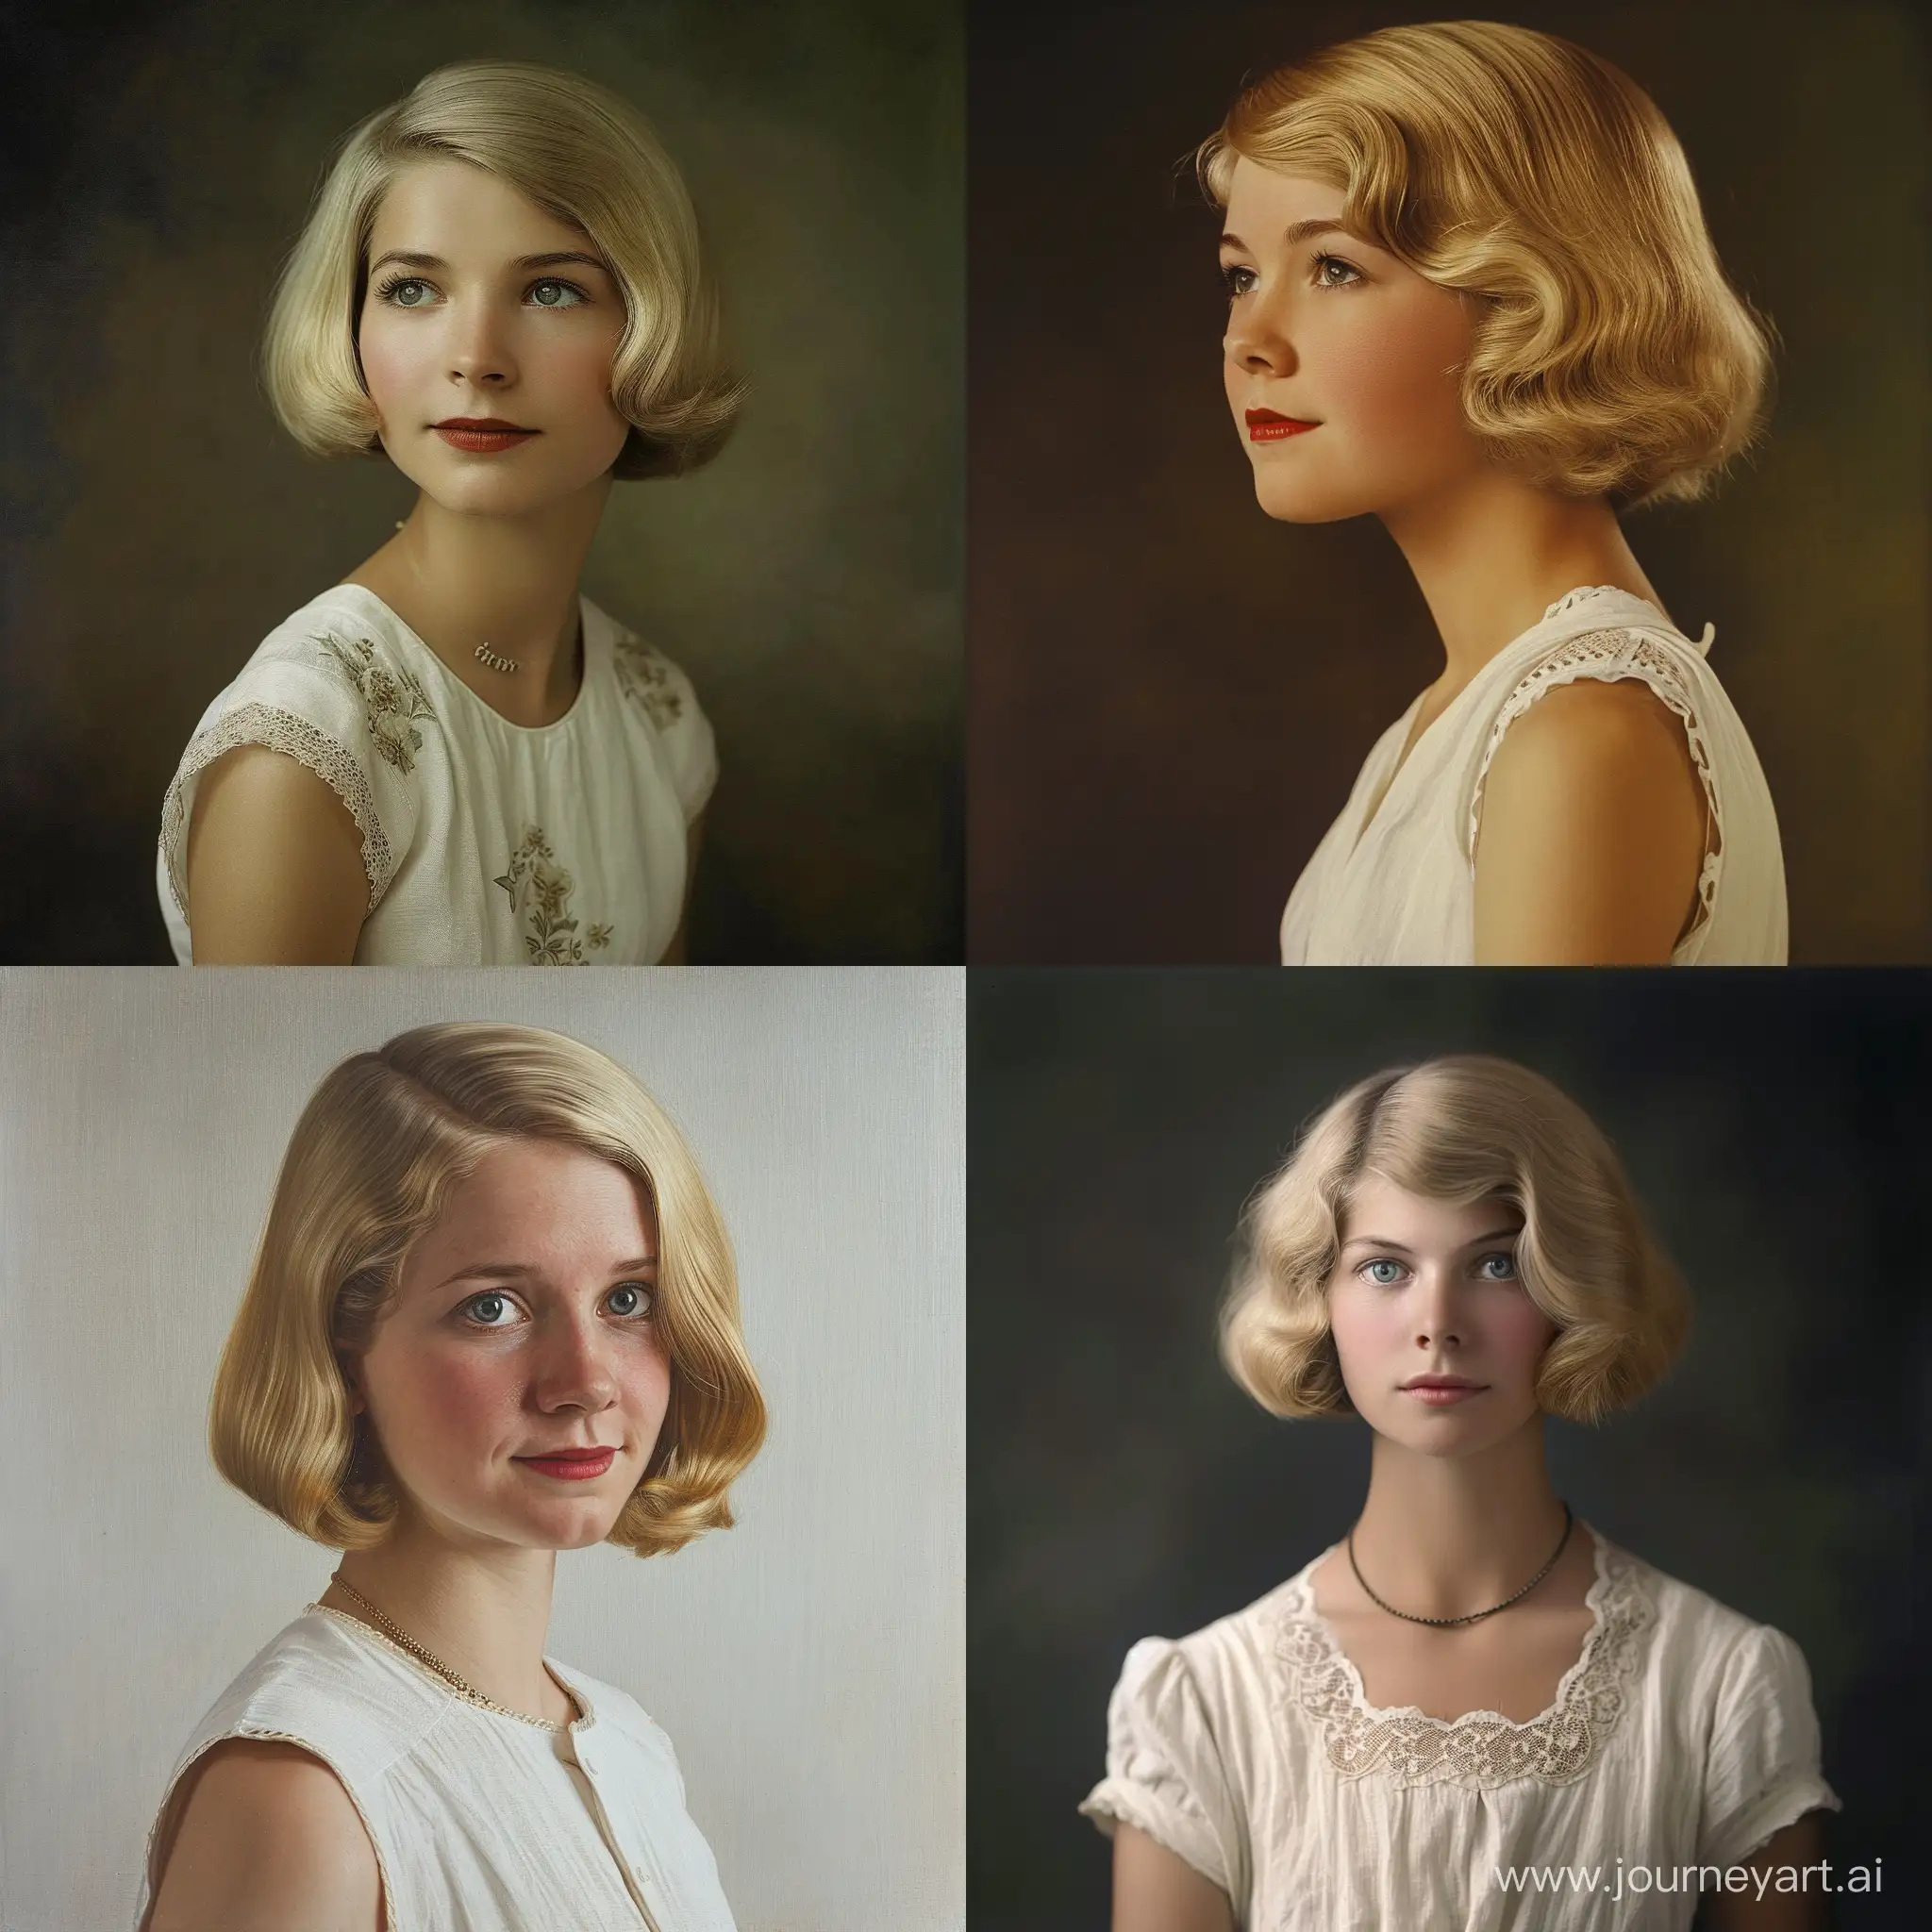 beautiful woman, blonde hair, bob cut, white cotton dress, portrait, strong expression, nobility, unmarried, 1925, england